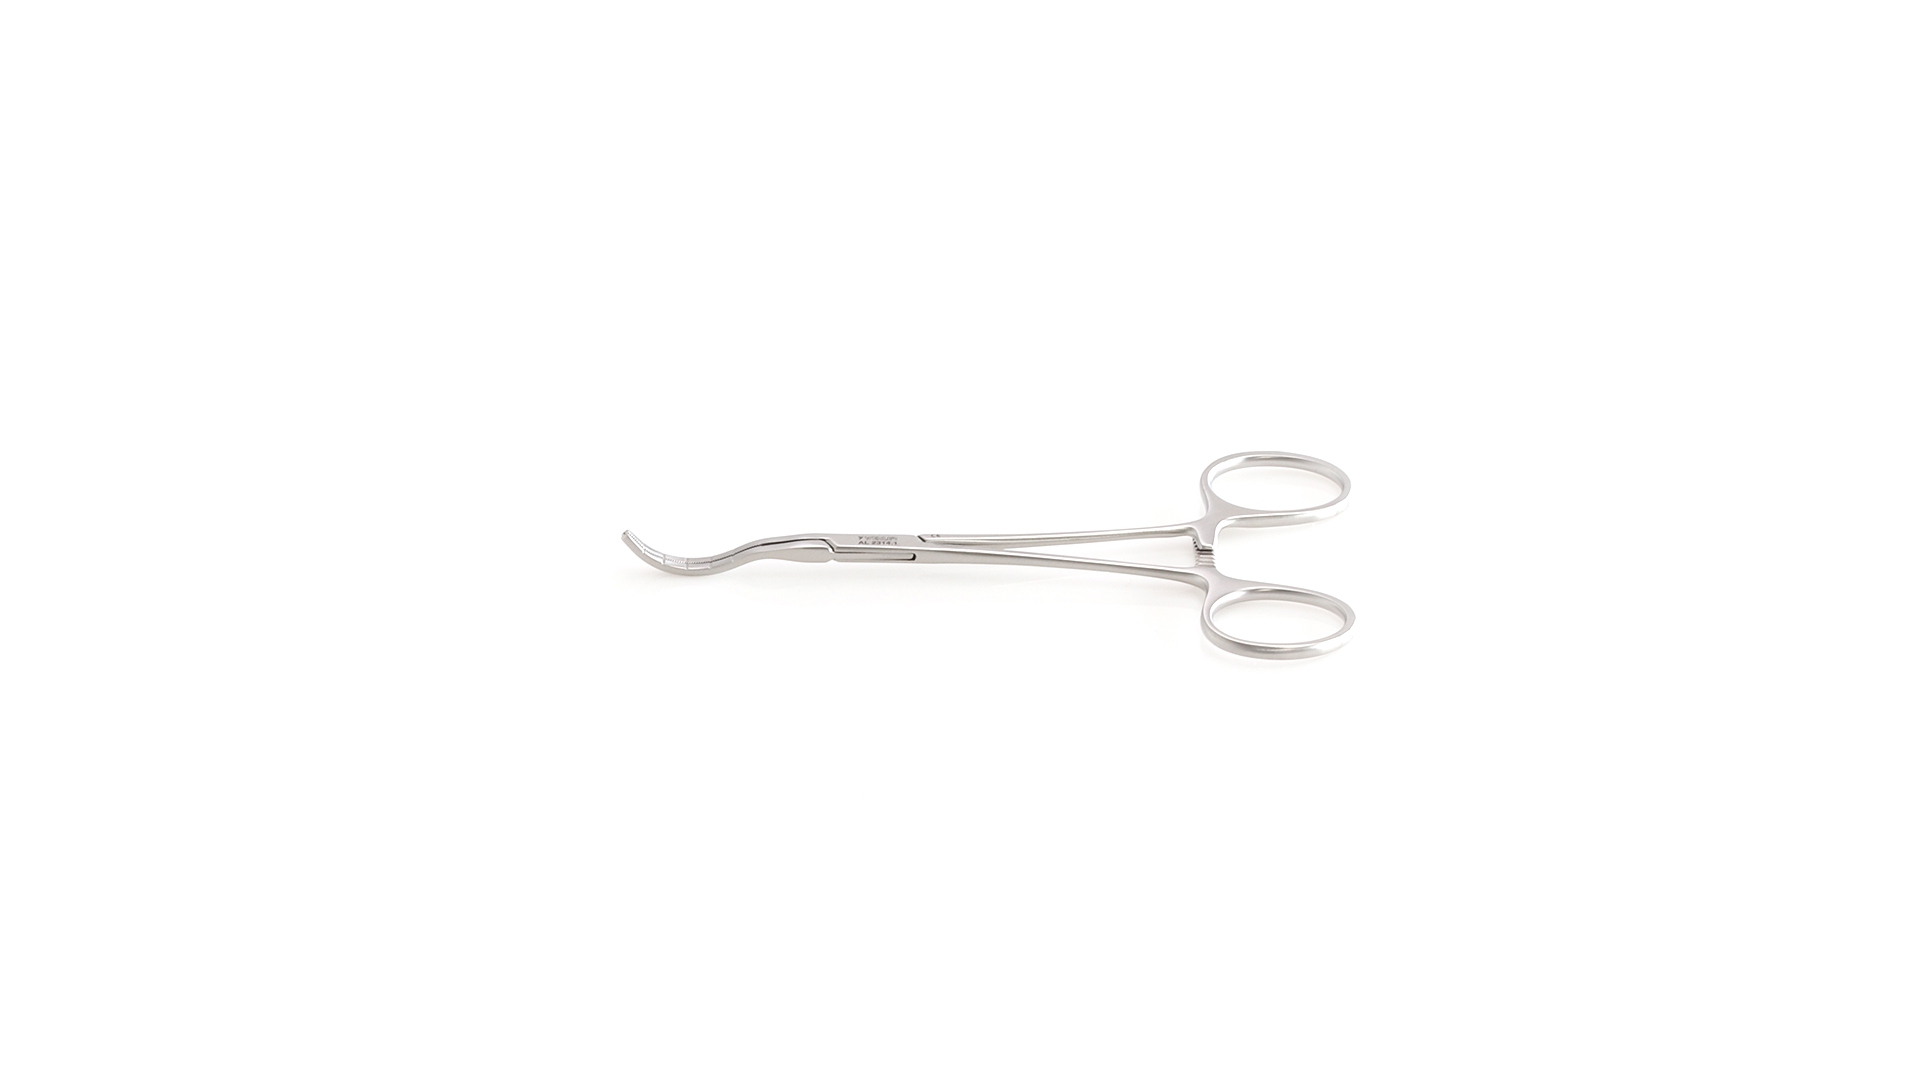 Wexler Baby Vascular Clamp - Small spoon Cooley Atraumatic jaws